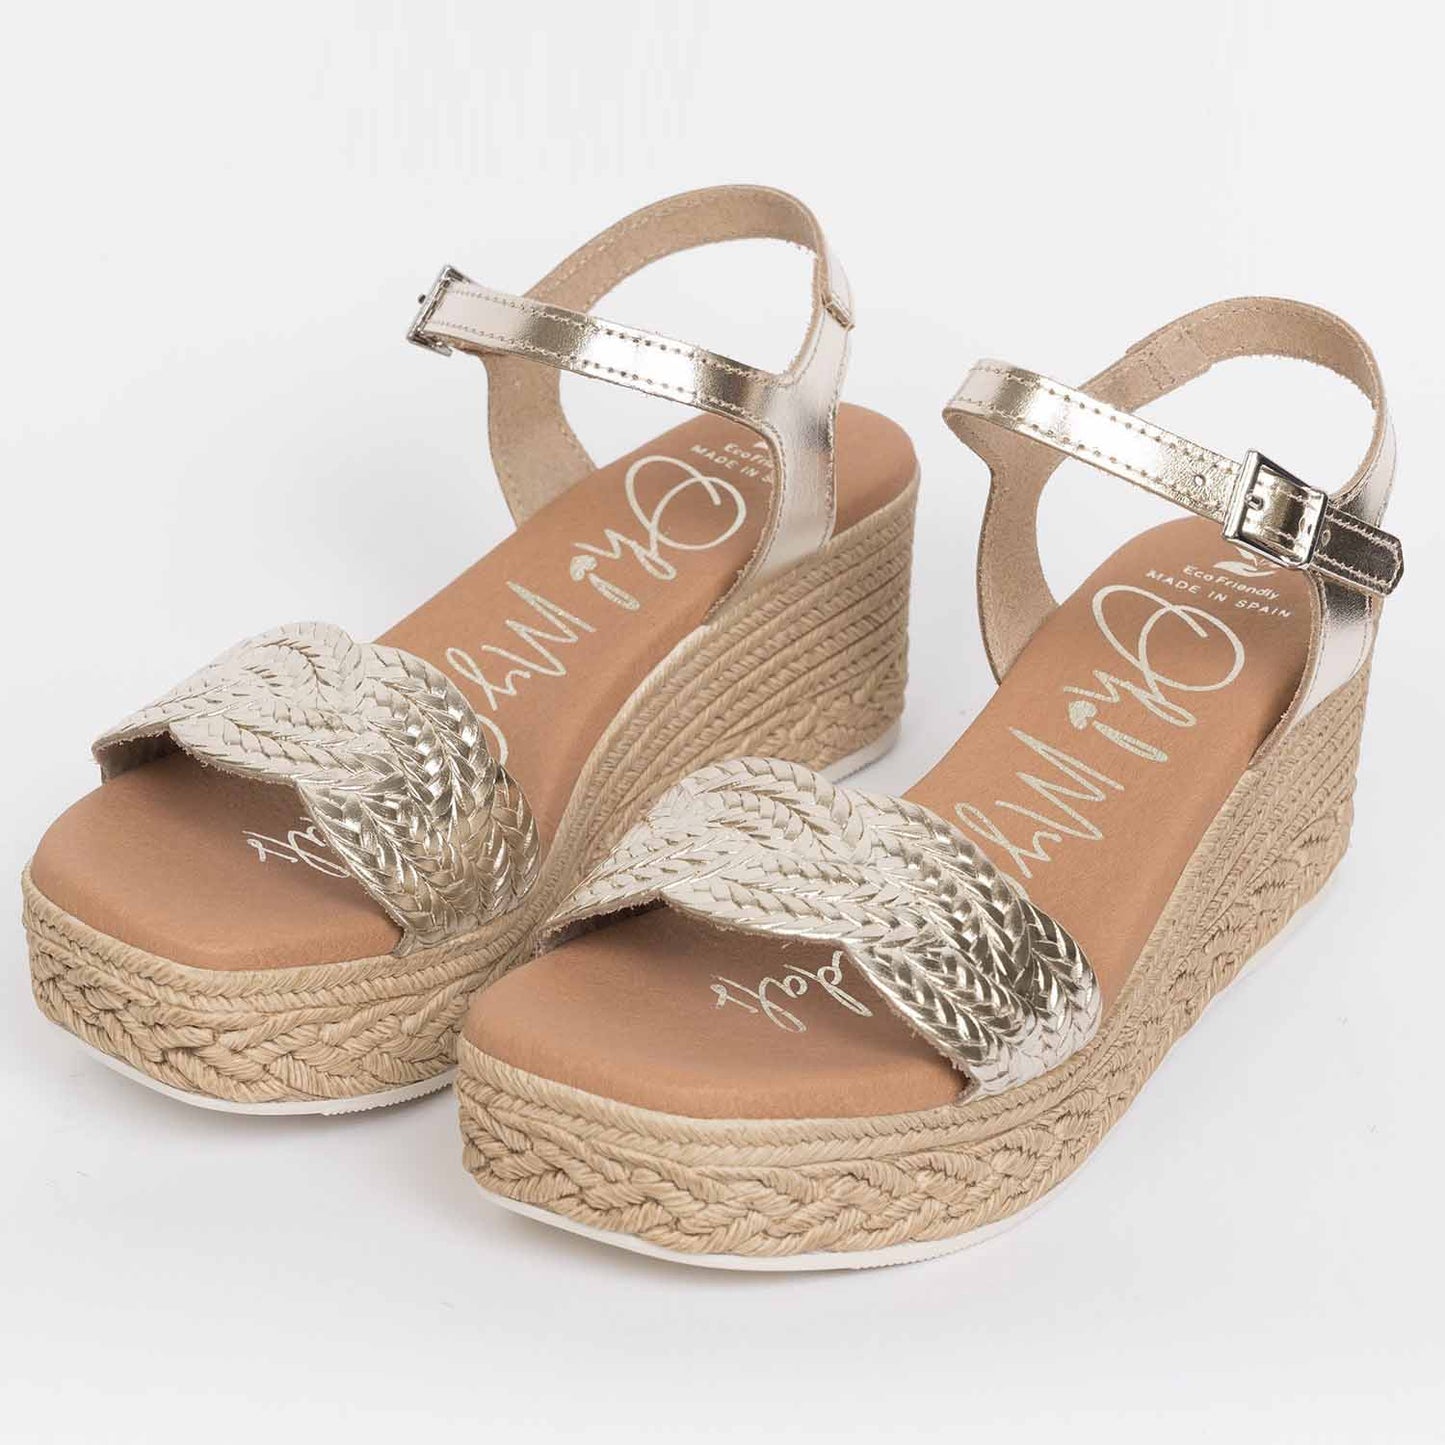 Oh My Sandals Sandali Champagne in pelle Made in Spagna